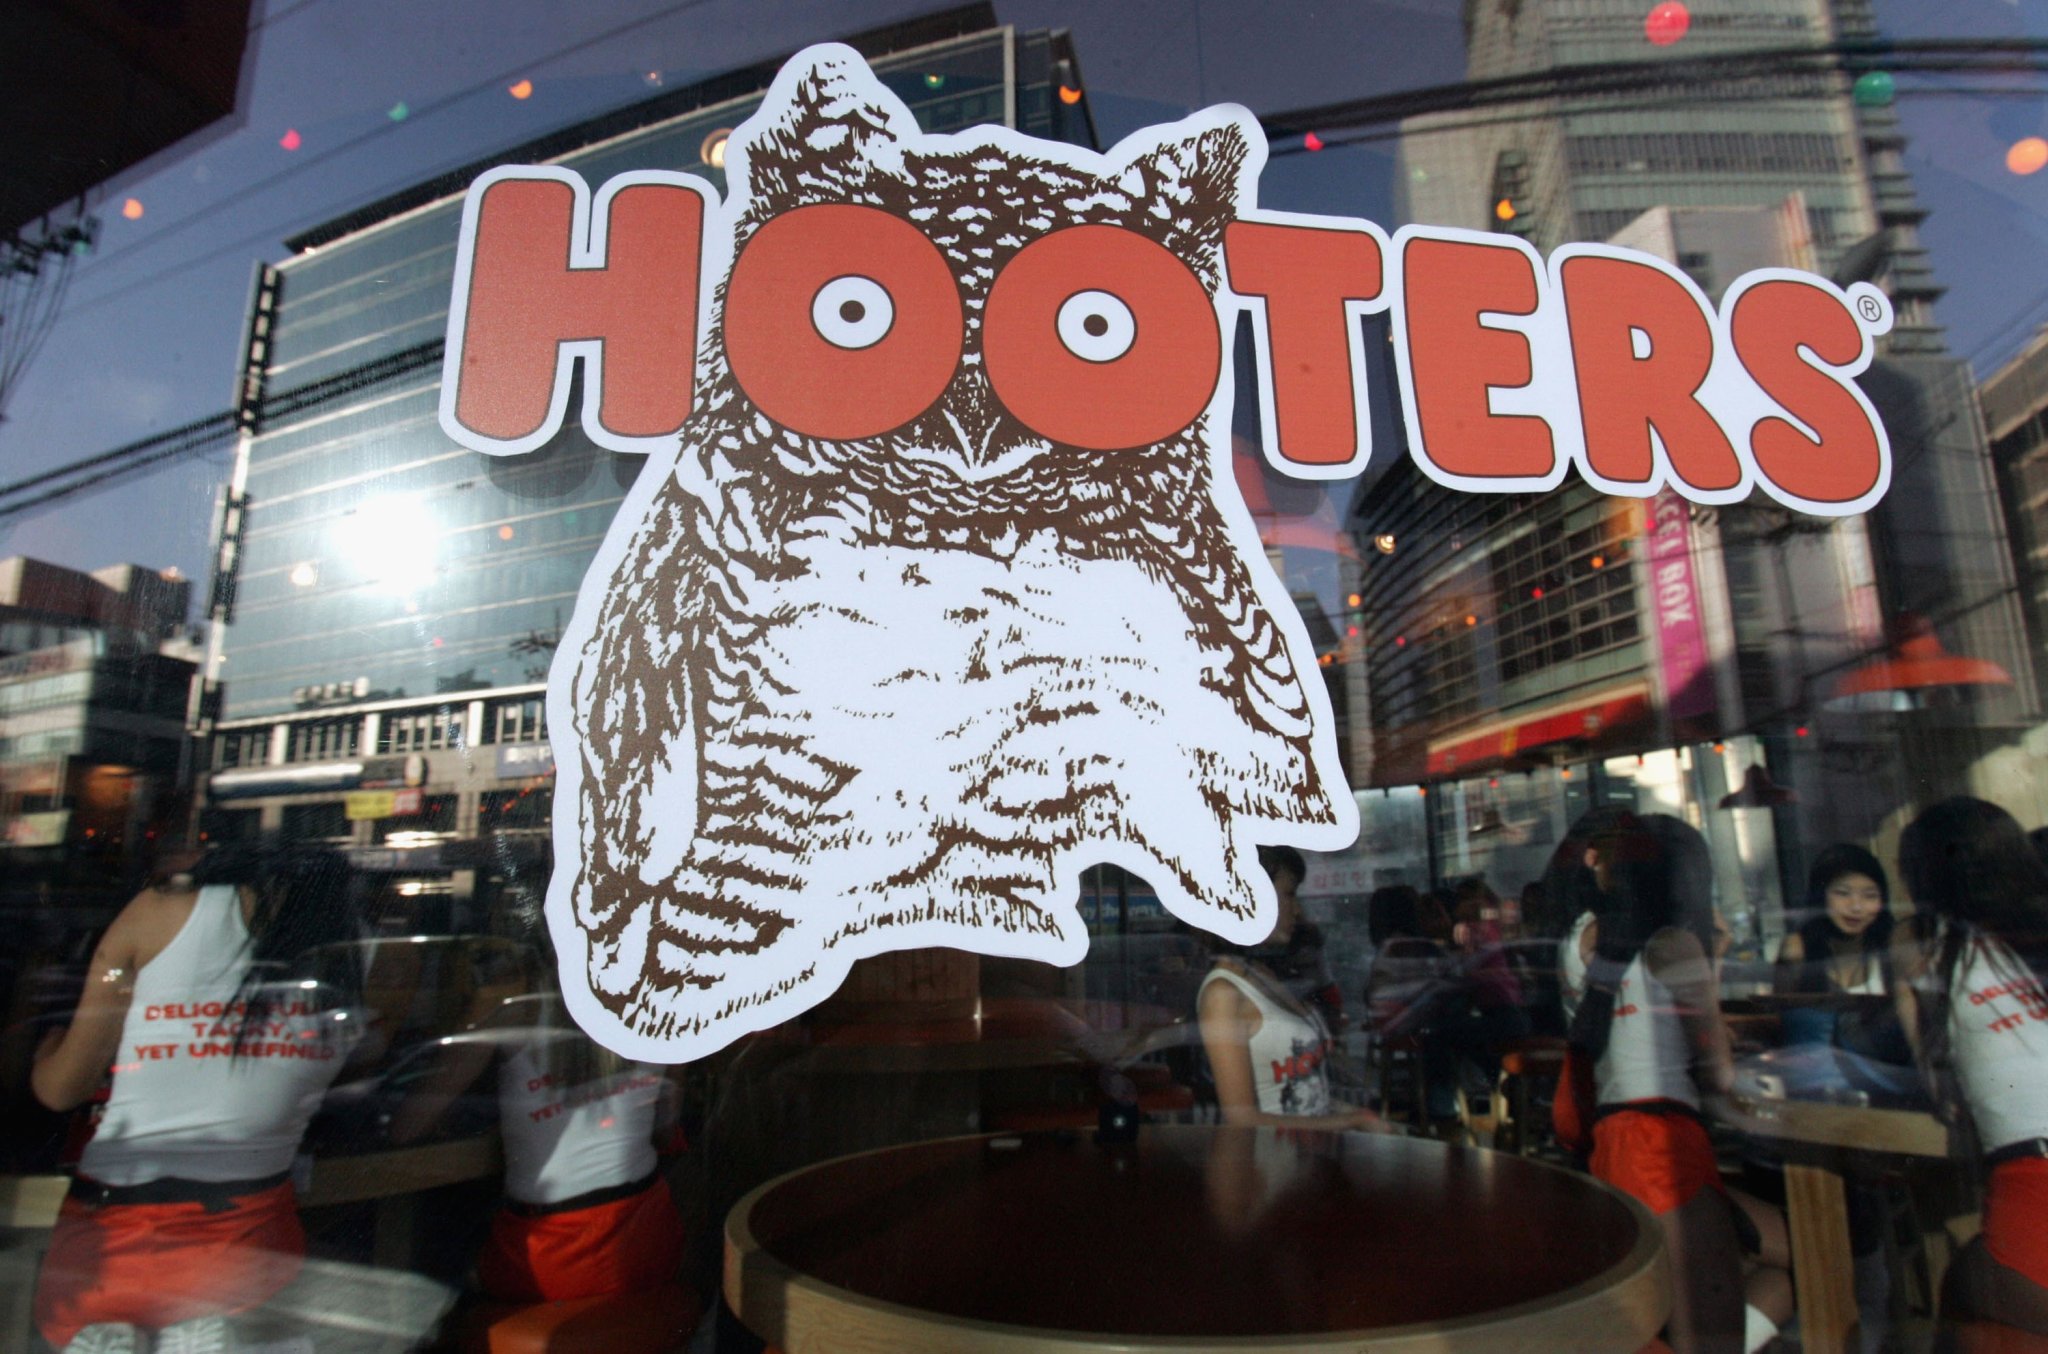 High School Soccer Coach In Hot Water For Taking Team To Hooters After Losing Game - BroBible